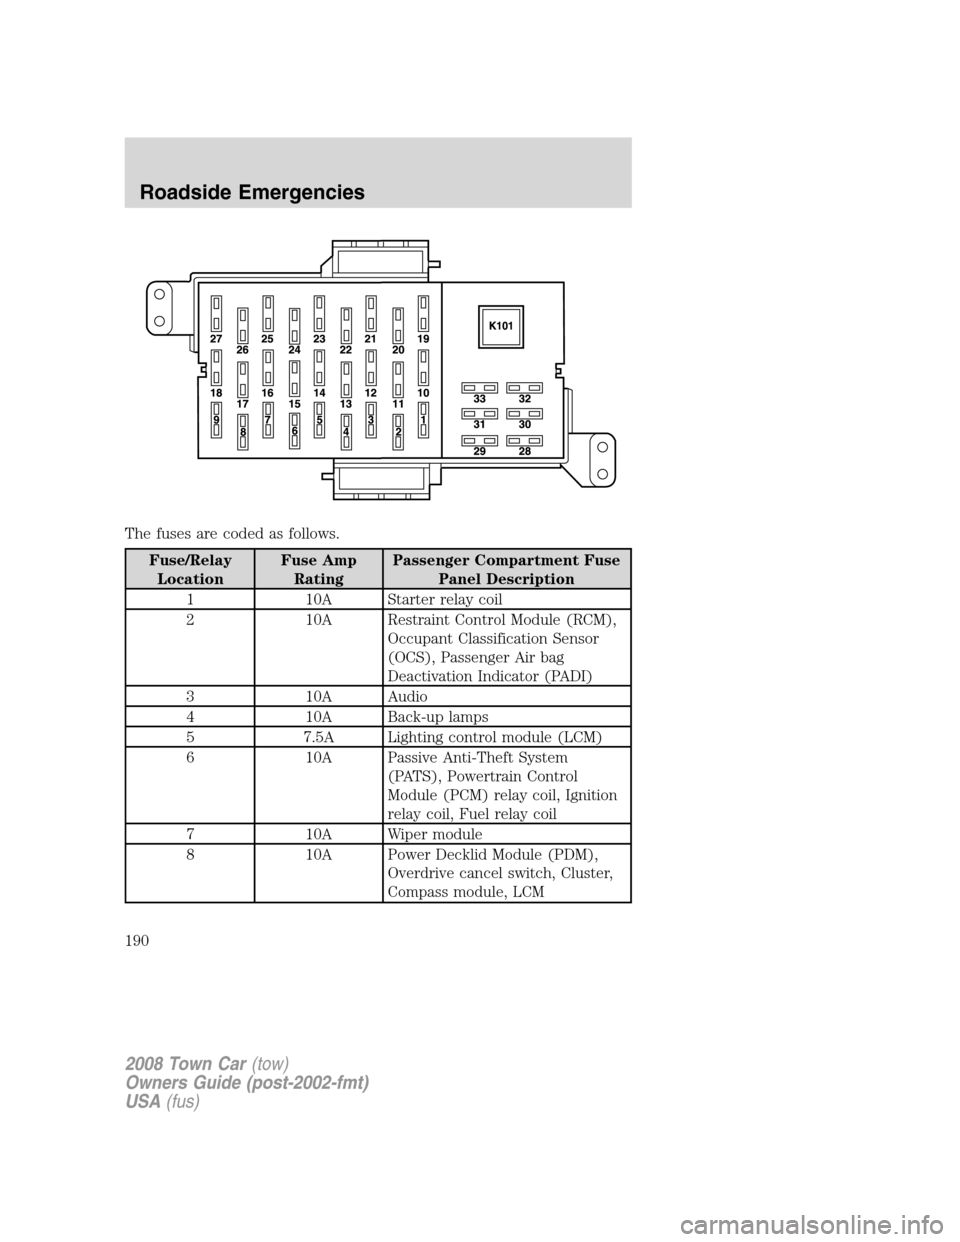 LINCOLN TOWN CAR 2008  Owners Manual The fuses are coded as follows.
Fuse/Relay
LocationFuse Amp
RatingPassenger Compartment Fuse
Panel Description
1 10A Starter relay coil
2 10A Restraint Control Module (RCM),
Occupant Classification Se